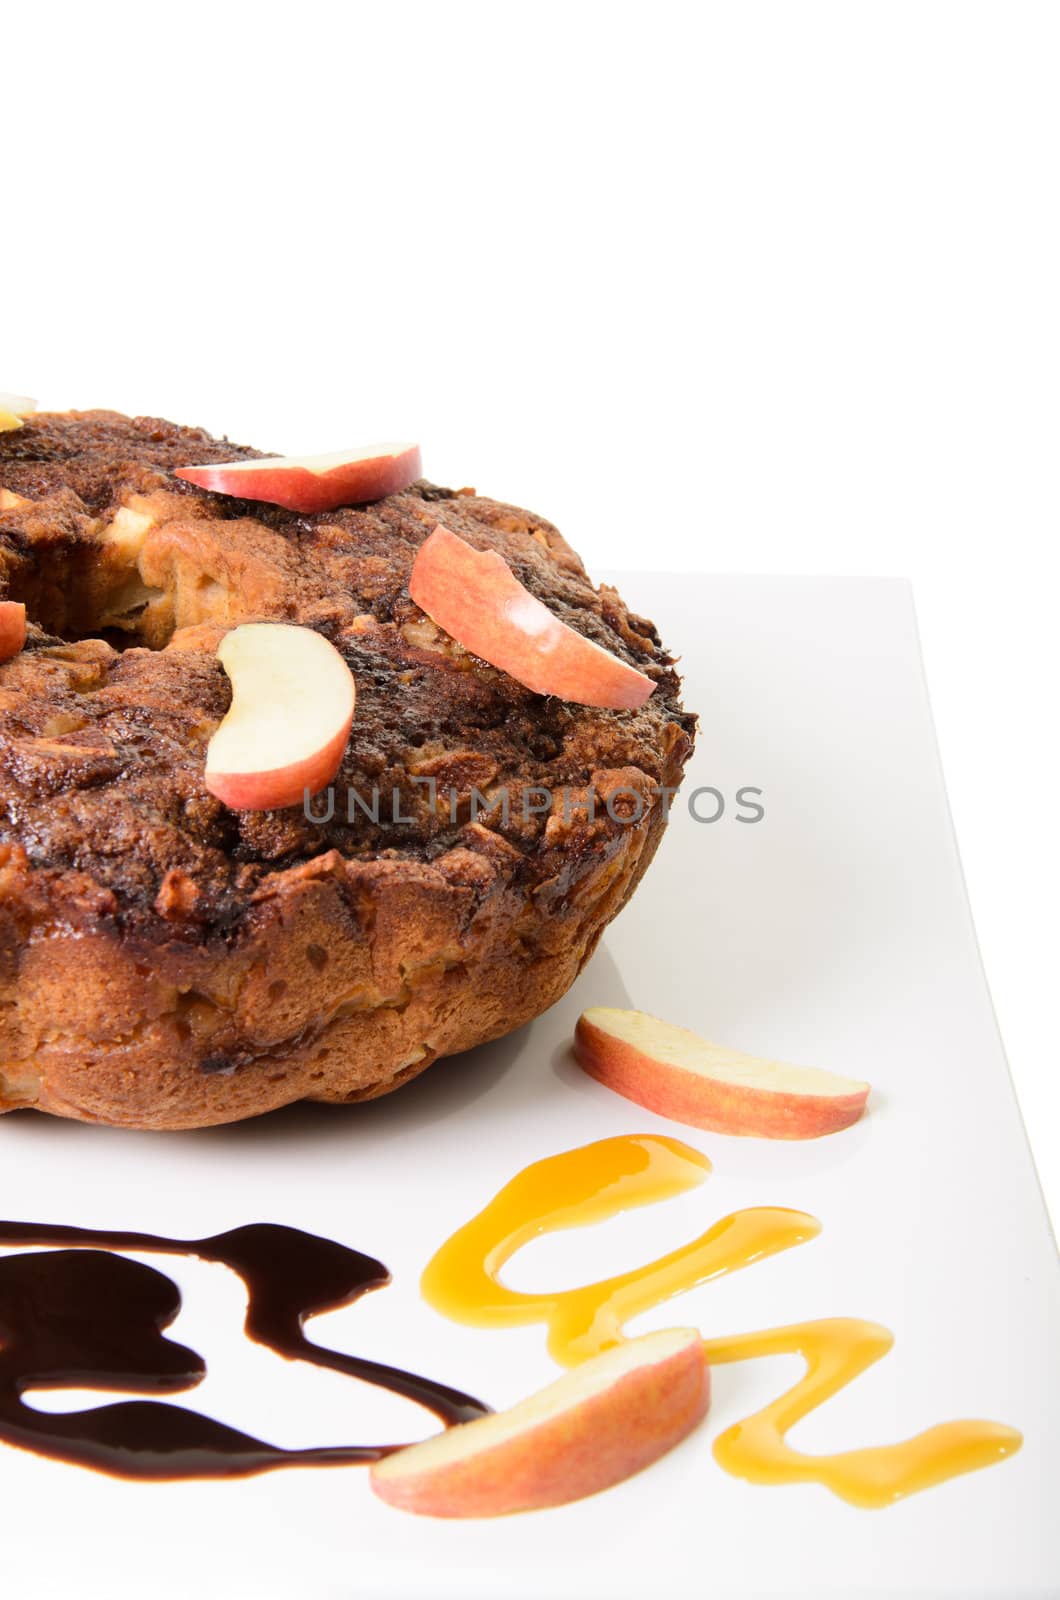 Apple coffee cake on a platter with swirls of chocolate and caramel, isolated on a white background